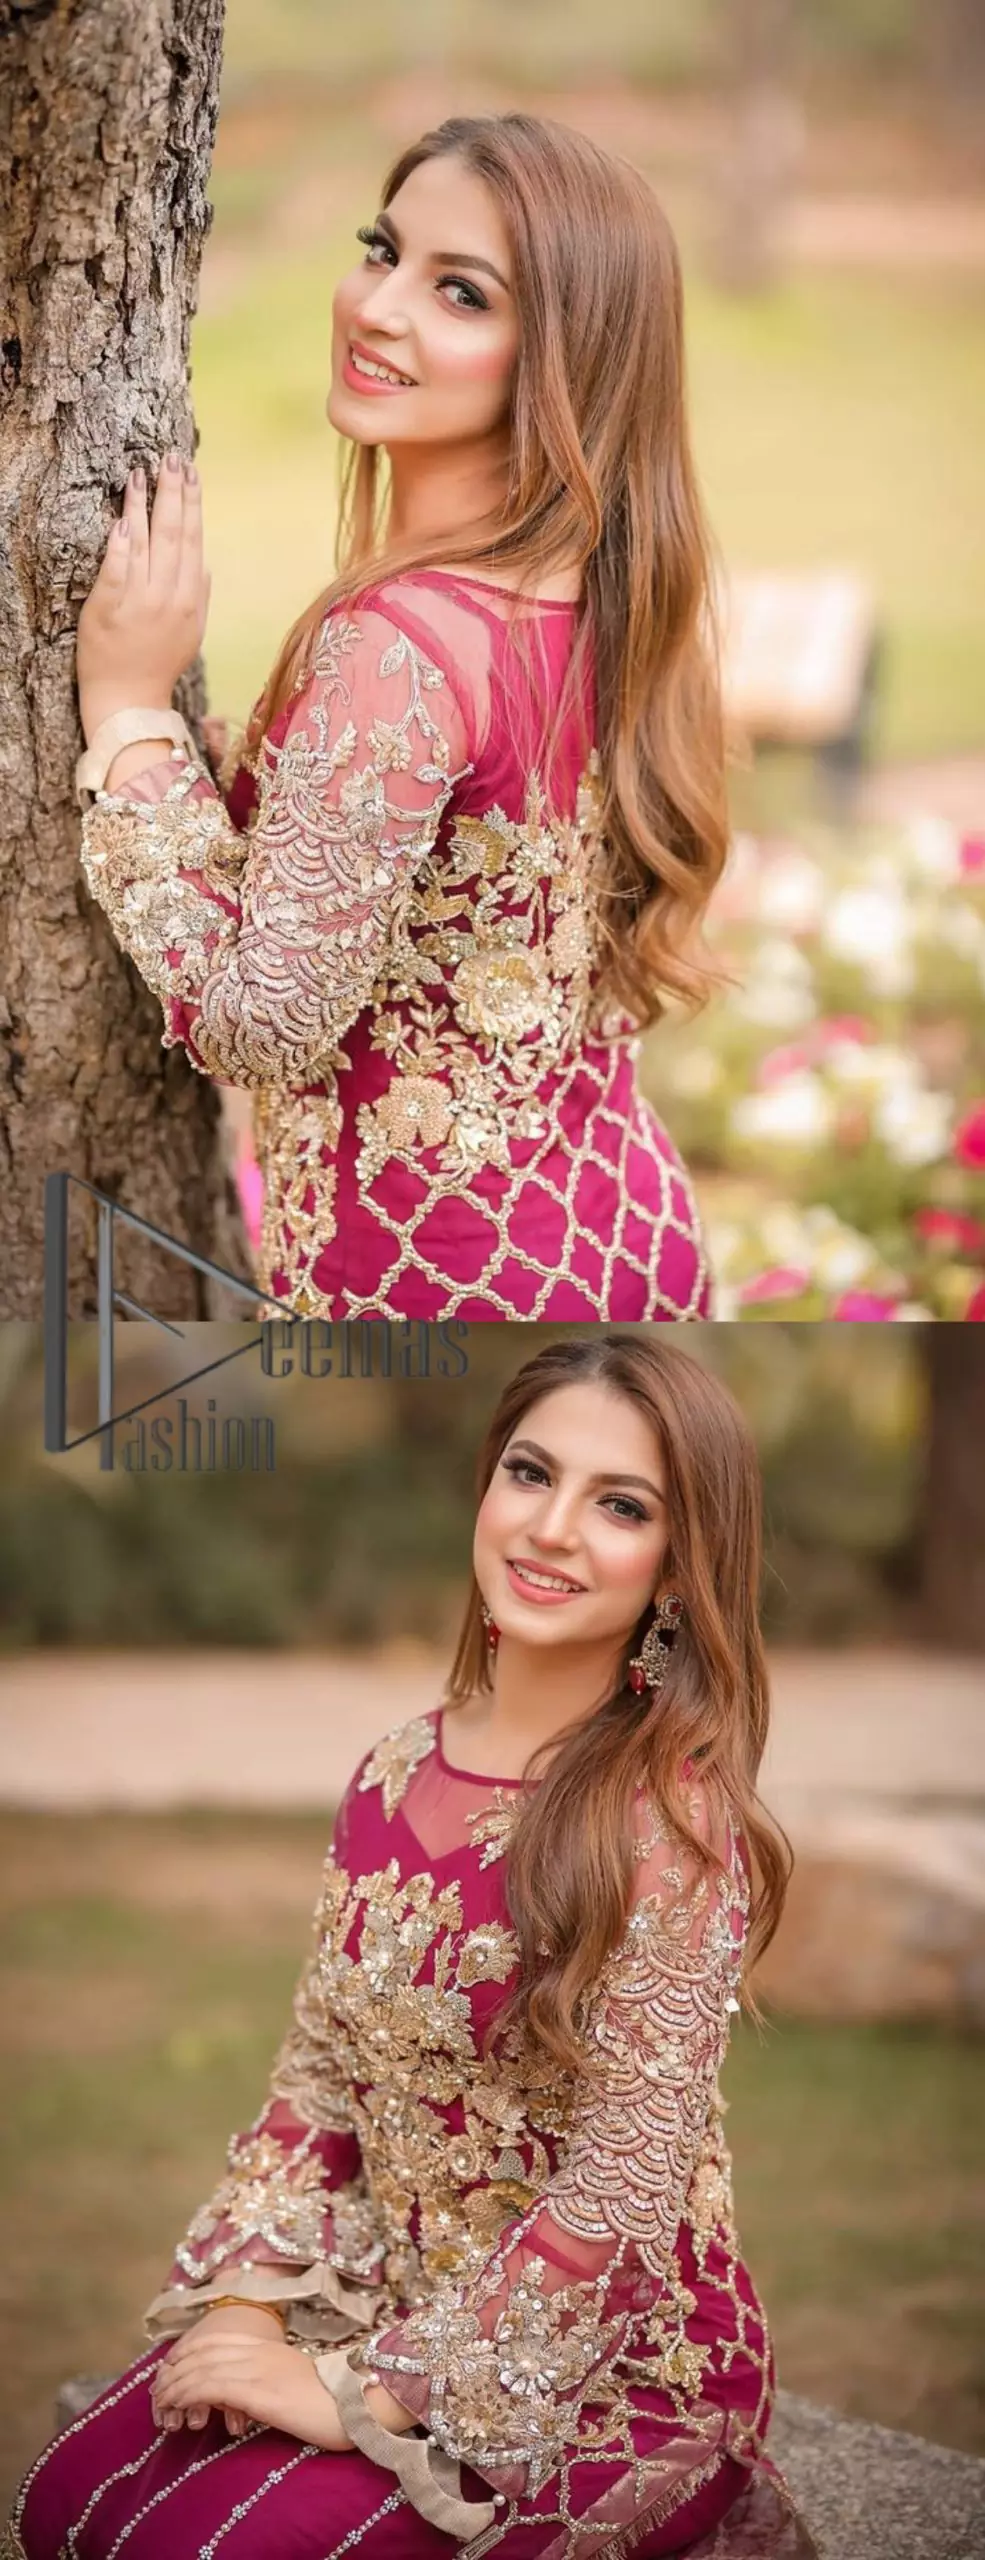 Take a step towards refreshing your wardrobe with a Shocking pink long Shirt. This dress is allured with floral embroidery. It is further enhanced with kora, dabka, kundan, sequins and pearls. It comes with raw silk trousers and enhances the art of classical heritage showcasing the craftsmanship of zardozi work on the bottom. Artistically embellished to give a beautiful rhythm to the outfit. This outfit is a perfect choice for daylight but equally breathtaking for night events.